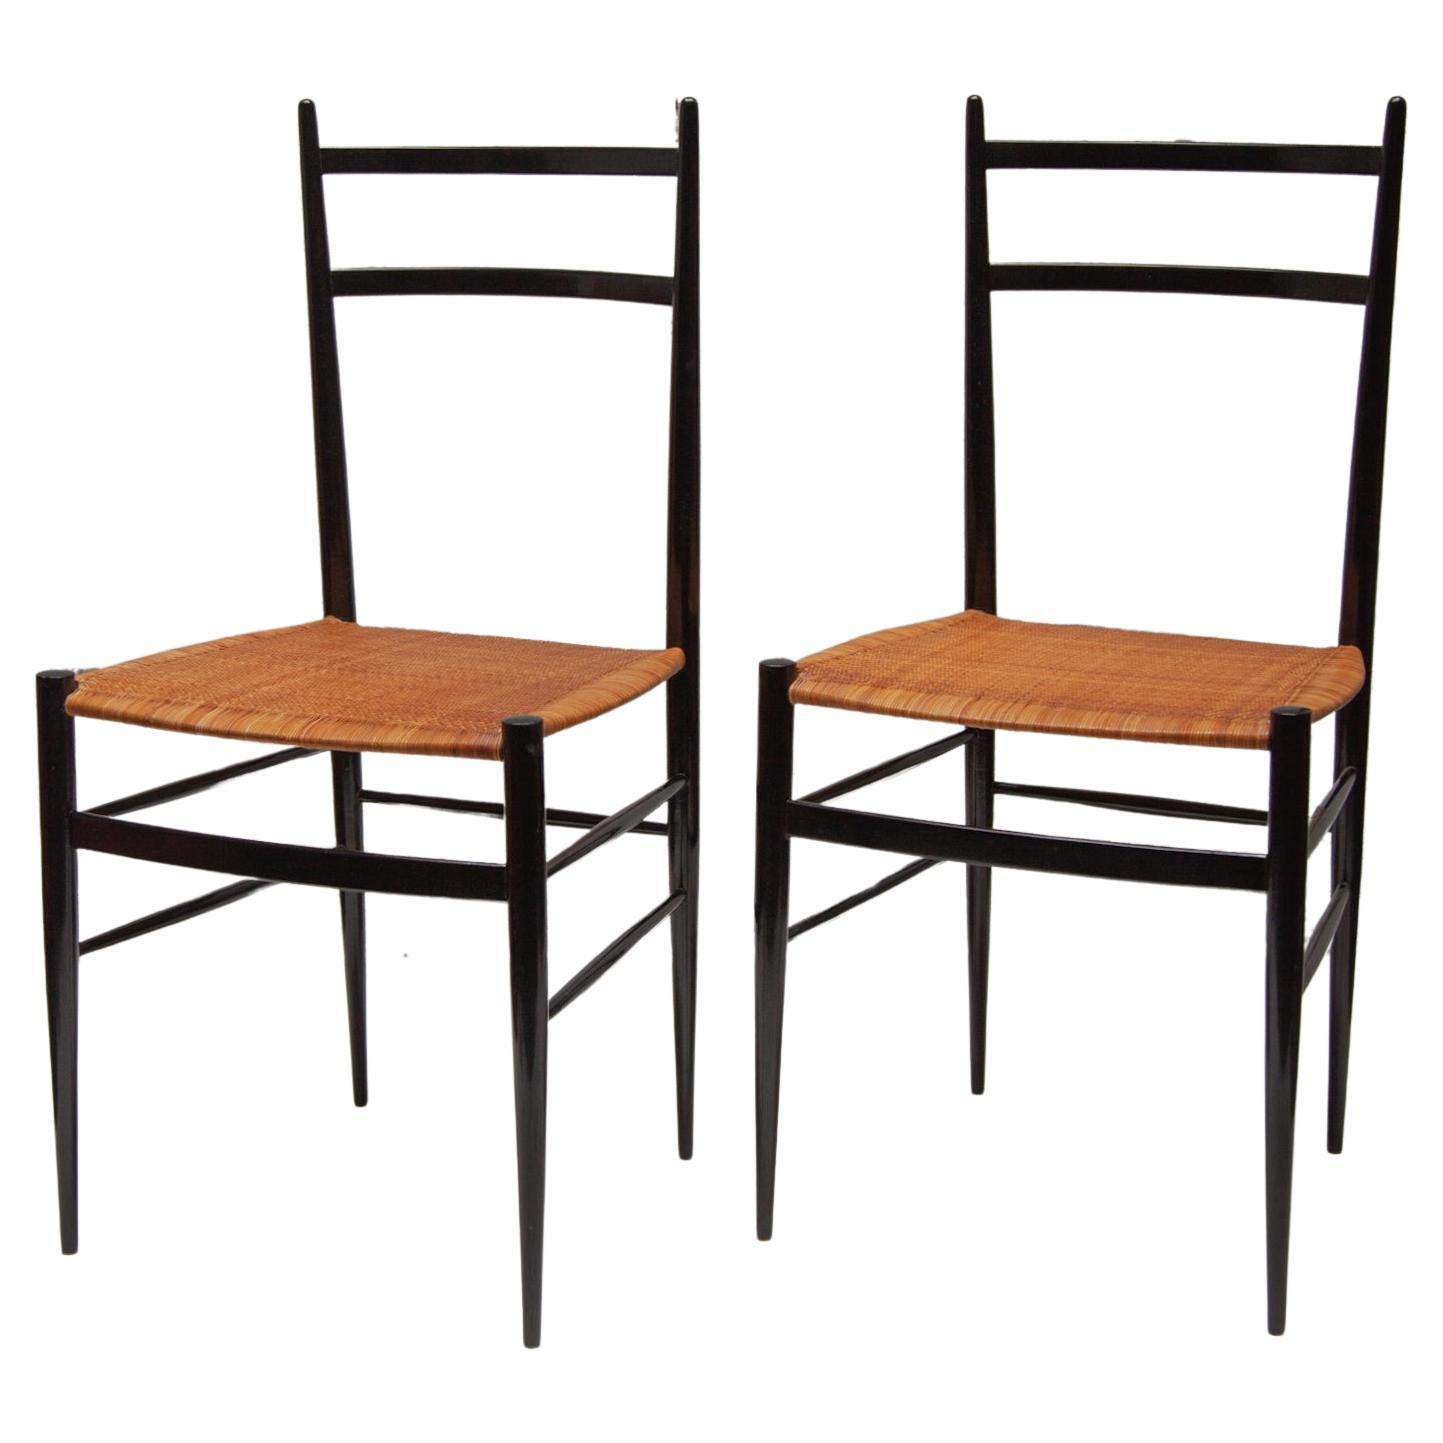 Set of Two Wicker "Chiavari" Chairs by Colombo Sanguineti, Italy, 1950 For Sale